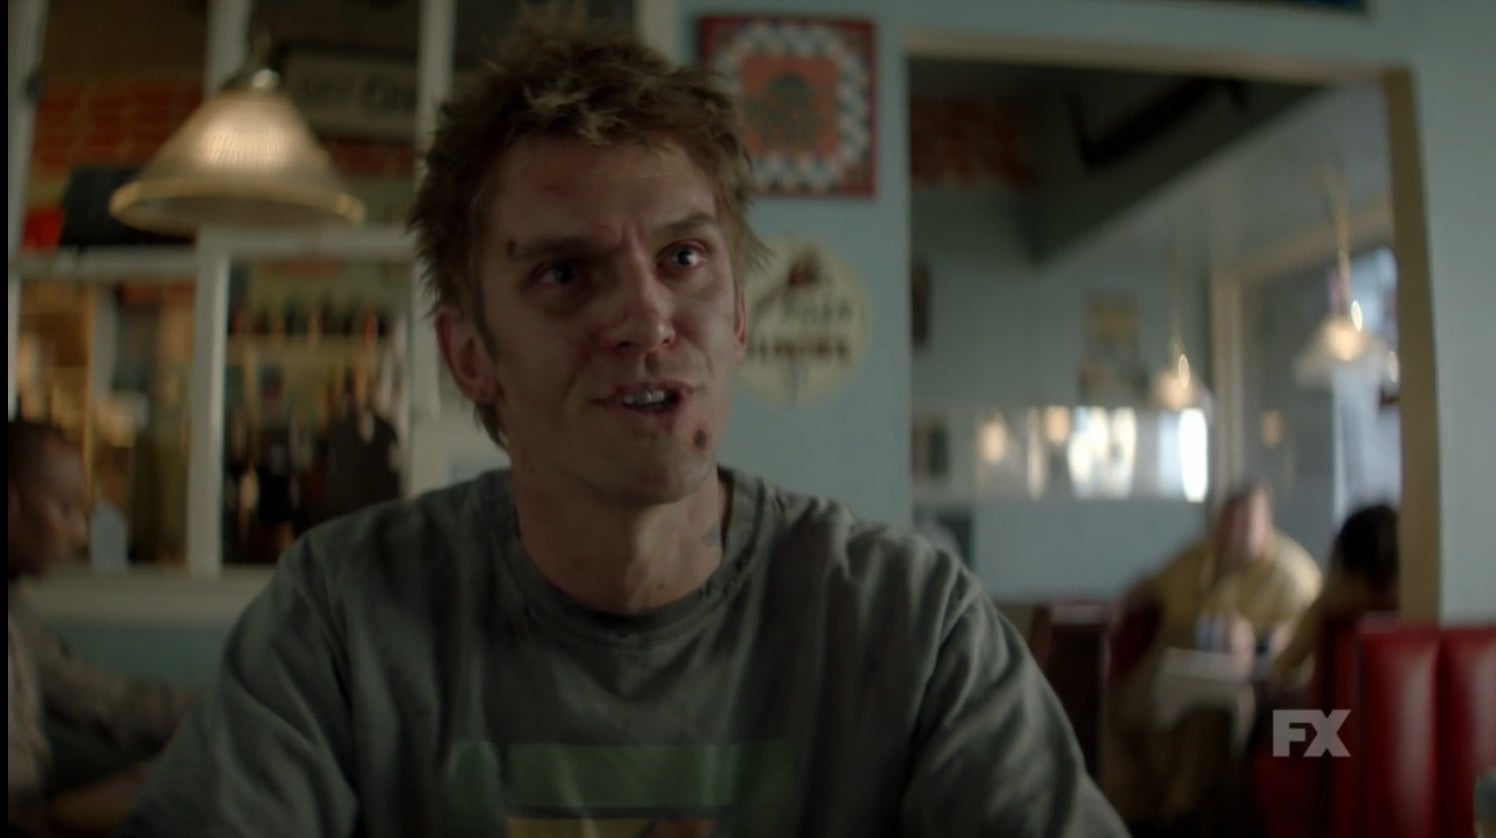 Dan Stevens, in a haggard visage, attempts to have a conversation in a restaurant